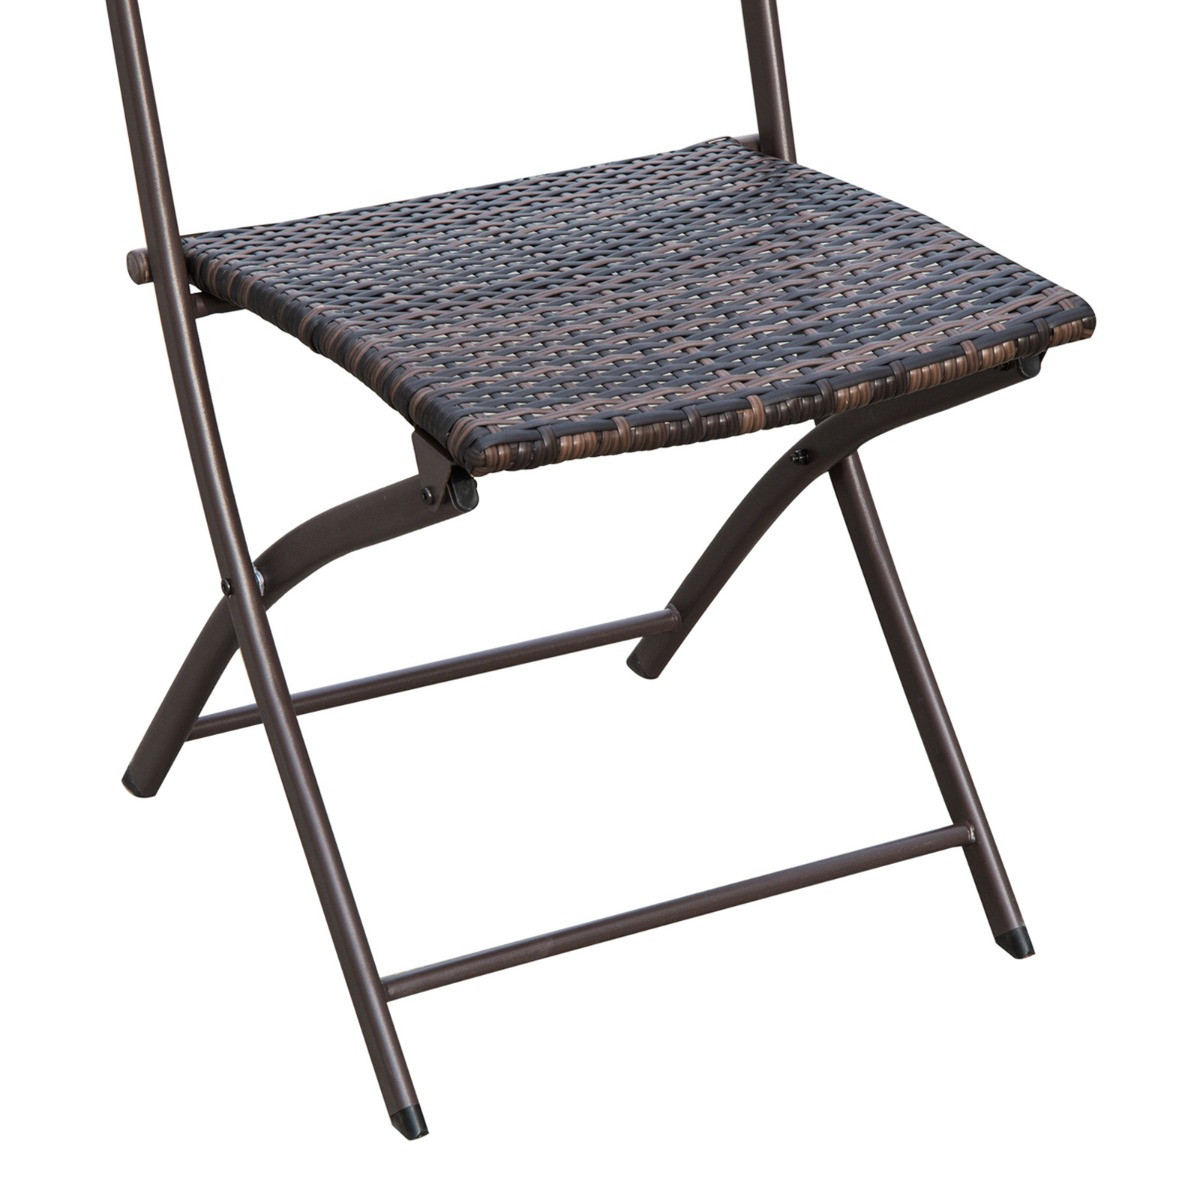 Outsunny Rattan Wicker Bistro Foldable Table Set, 3 Piece - Brown>